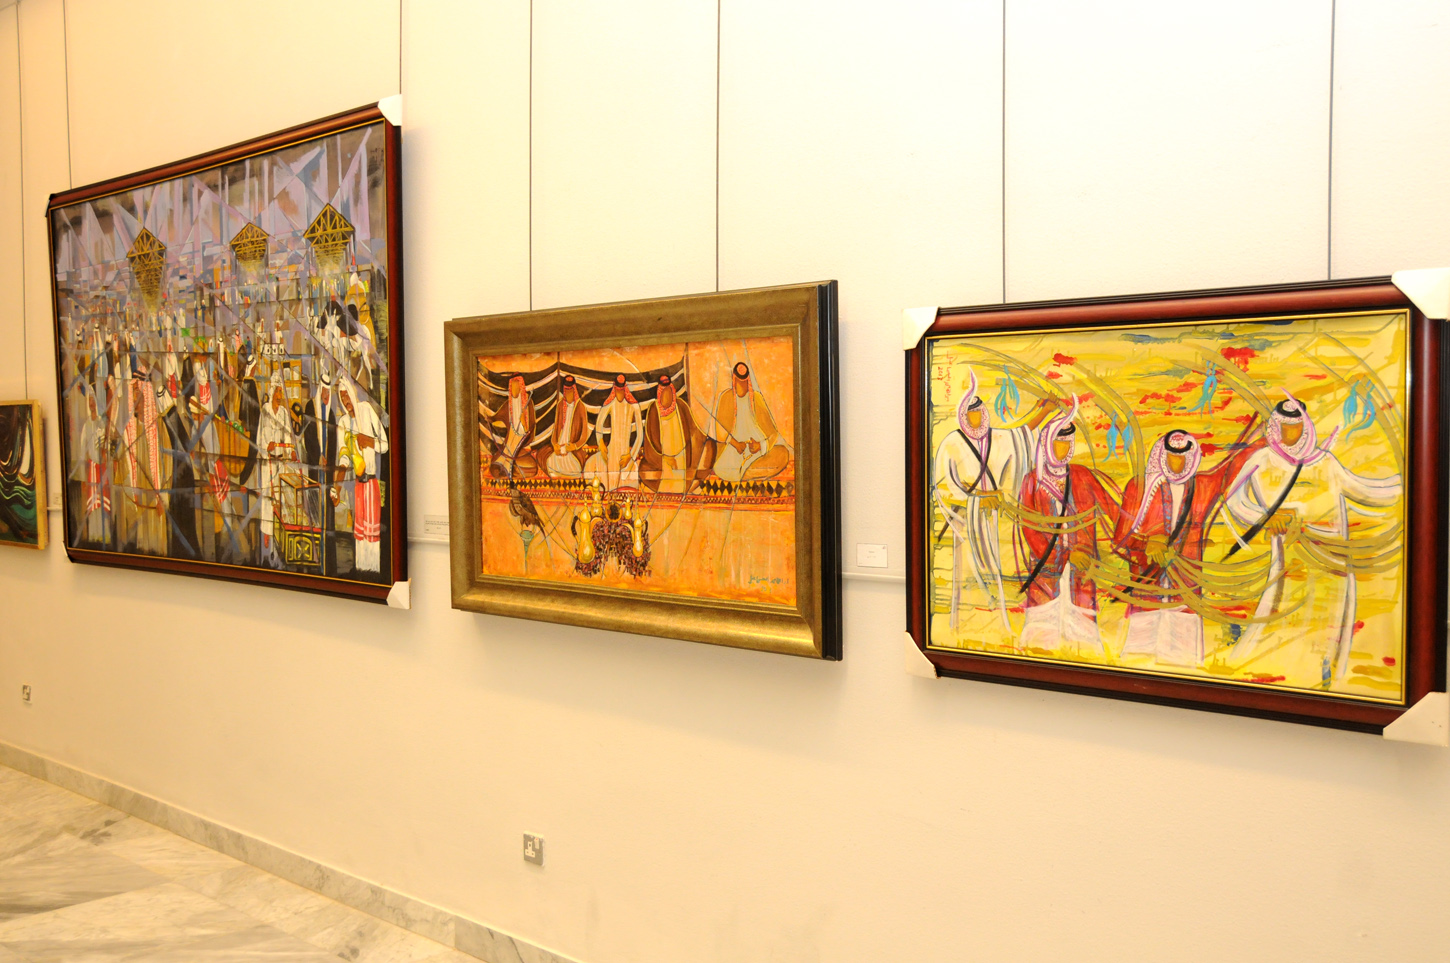 Some of Ibrahim Ismail's painting exhibited at his 17th exhibition at the Arts Gallery